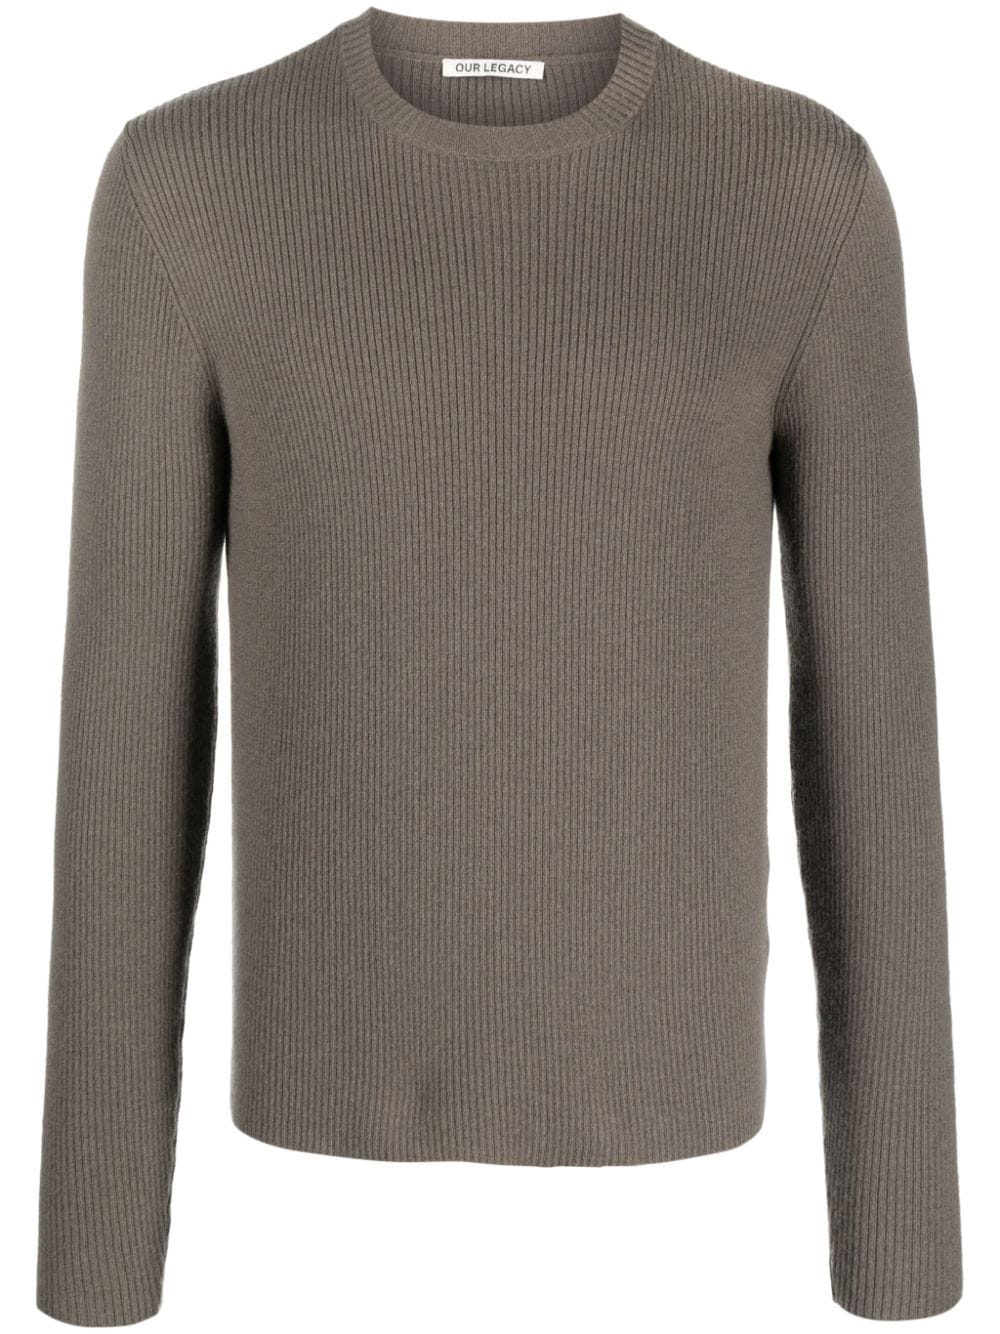 OUR LEGACY ribbed-knit merino wool jumper - Grey von OUR LEGACY